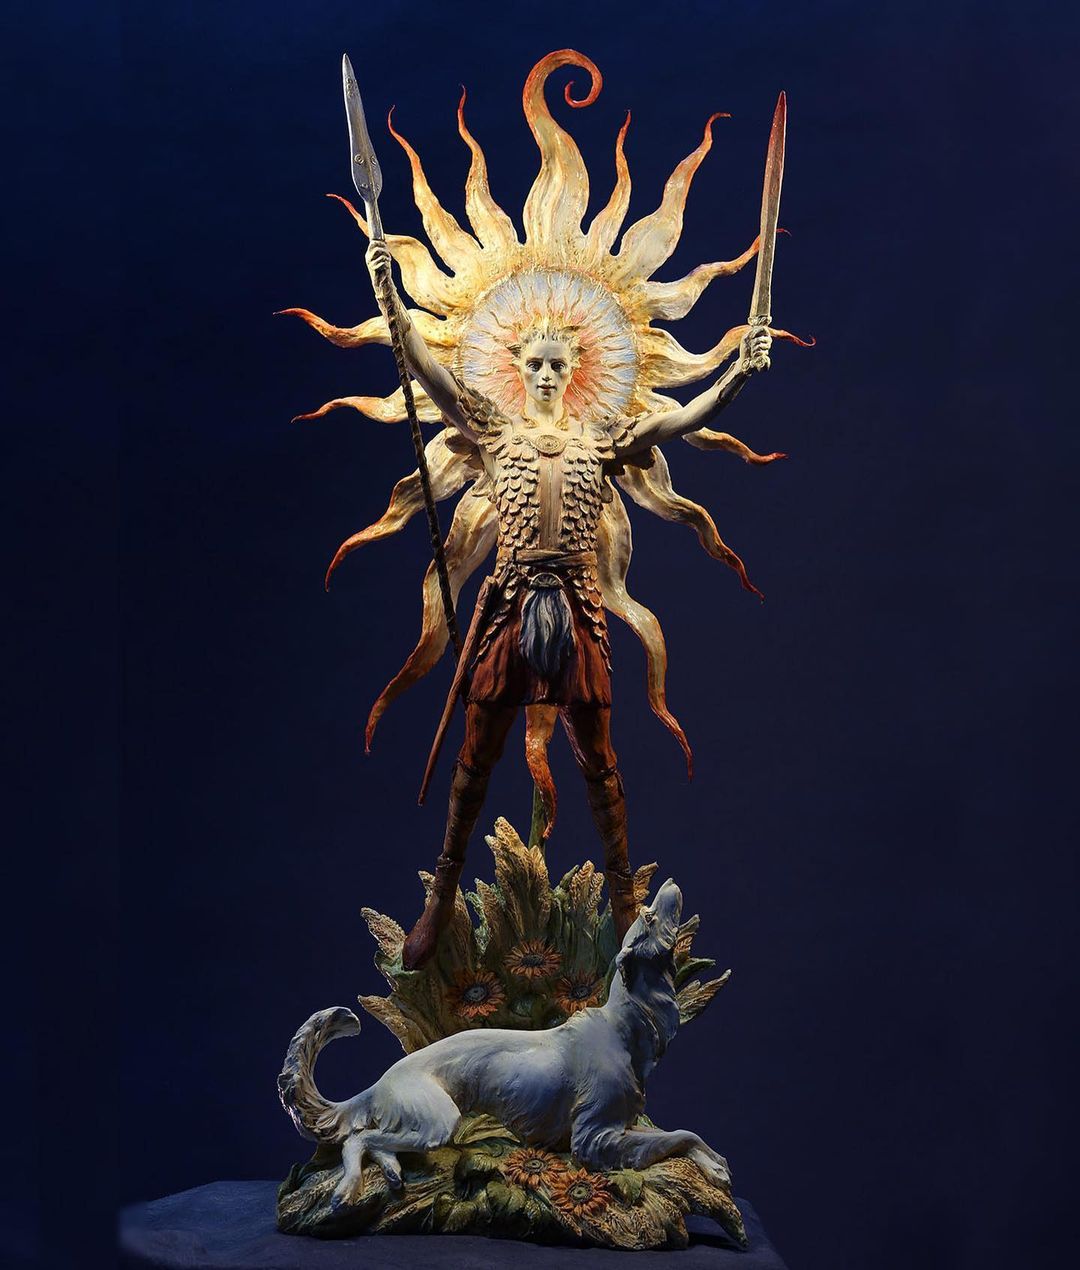 Magical Surreal And Allegorical Sculptures Of Fantastical Beings By Forest Rogers 14